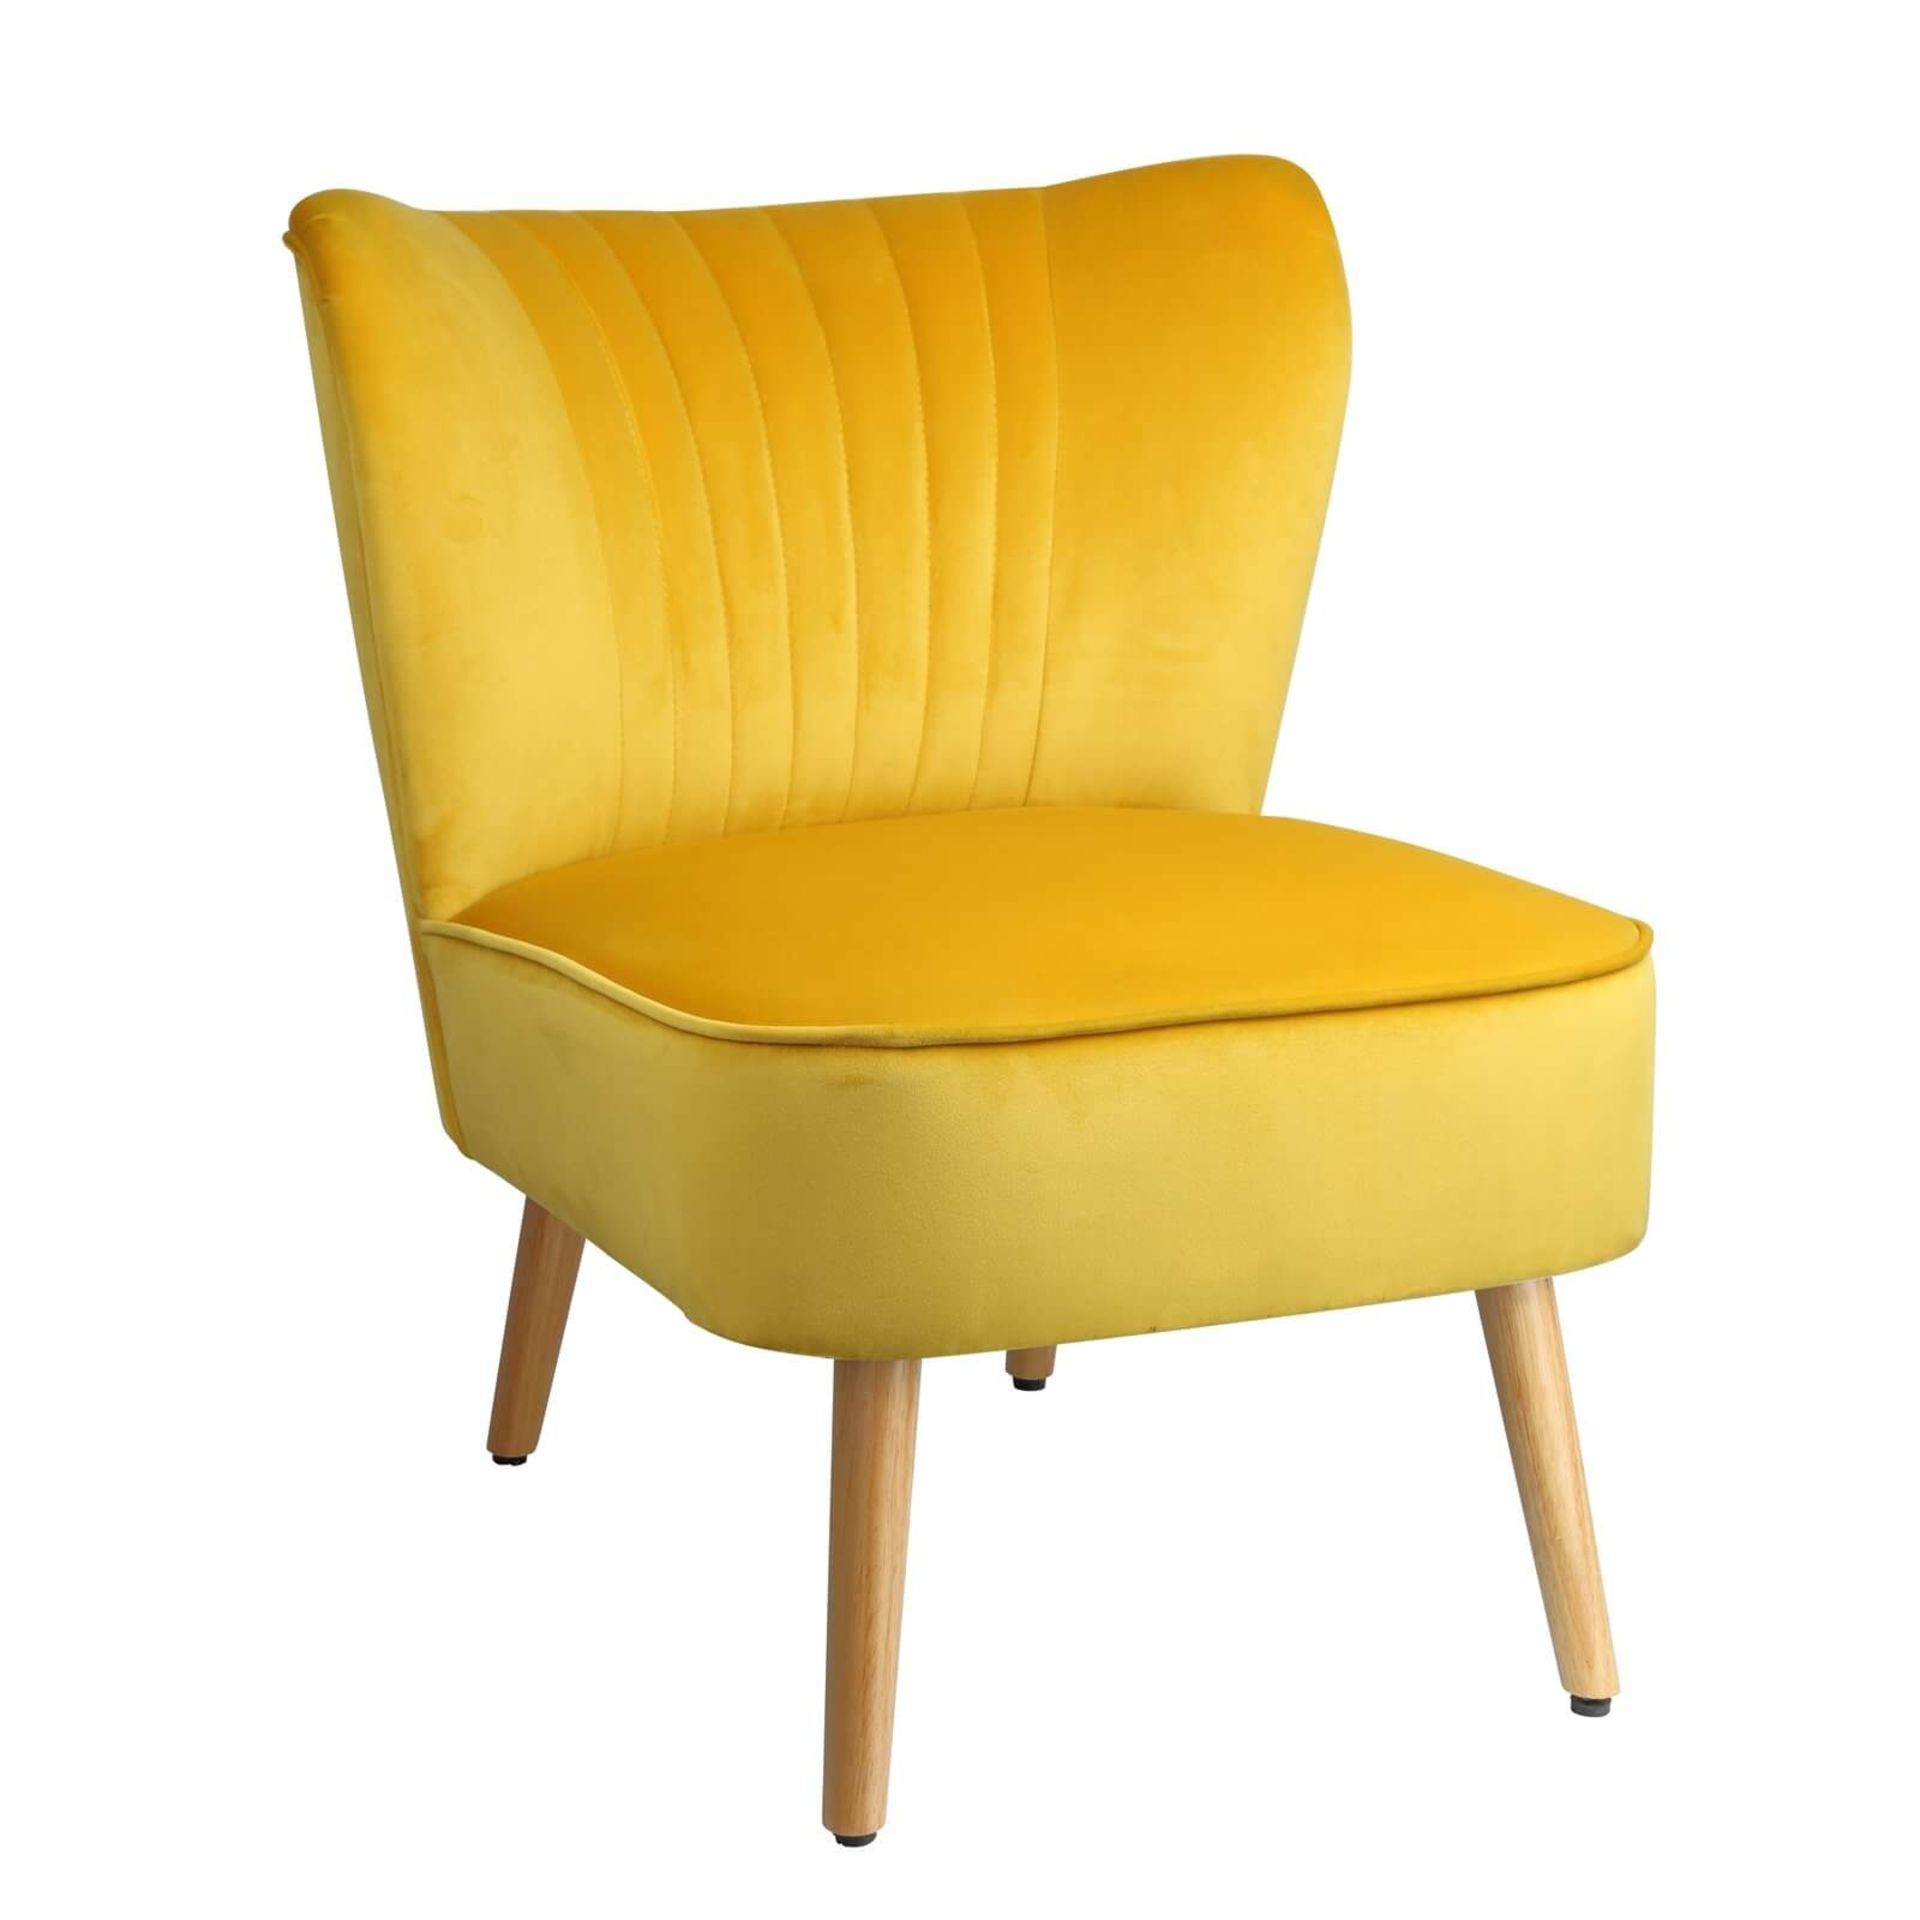 (R6K) 1 X Occasional Chair Ochre. Velvet Cover With Rubberwood Legs (H72xW60xD70cm) - Image 2 of 6